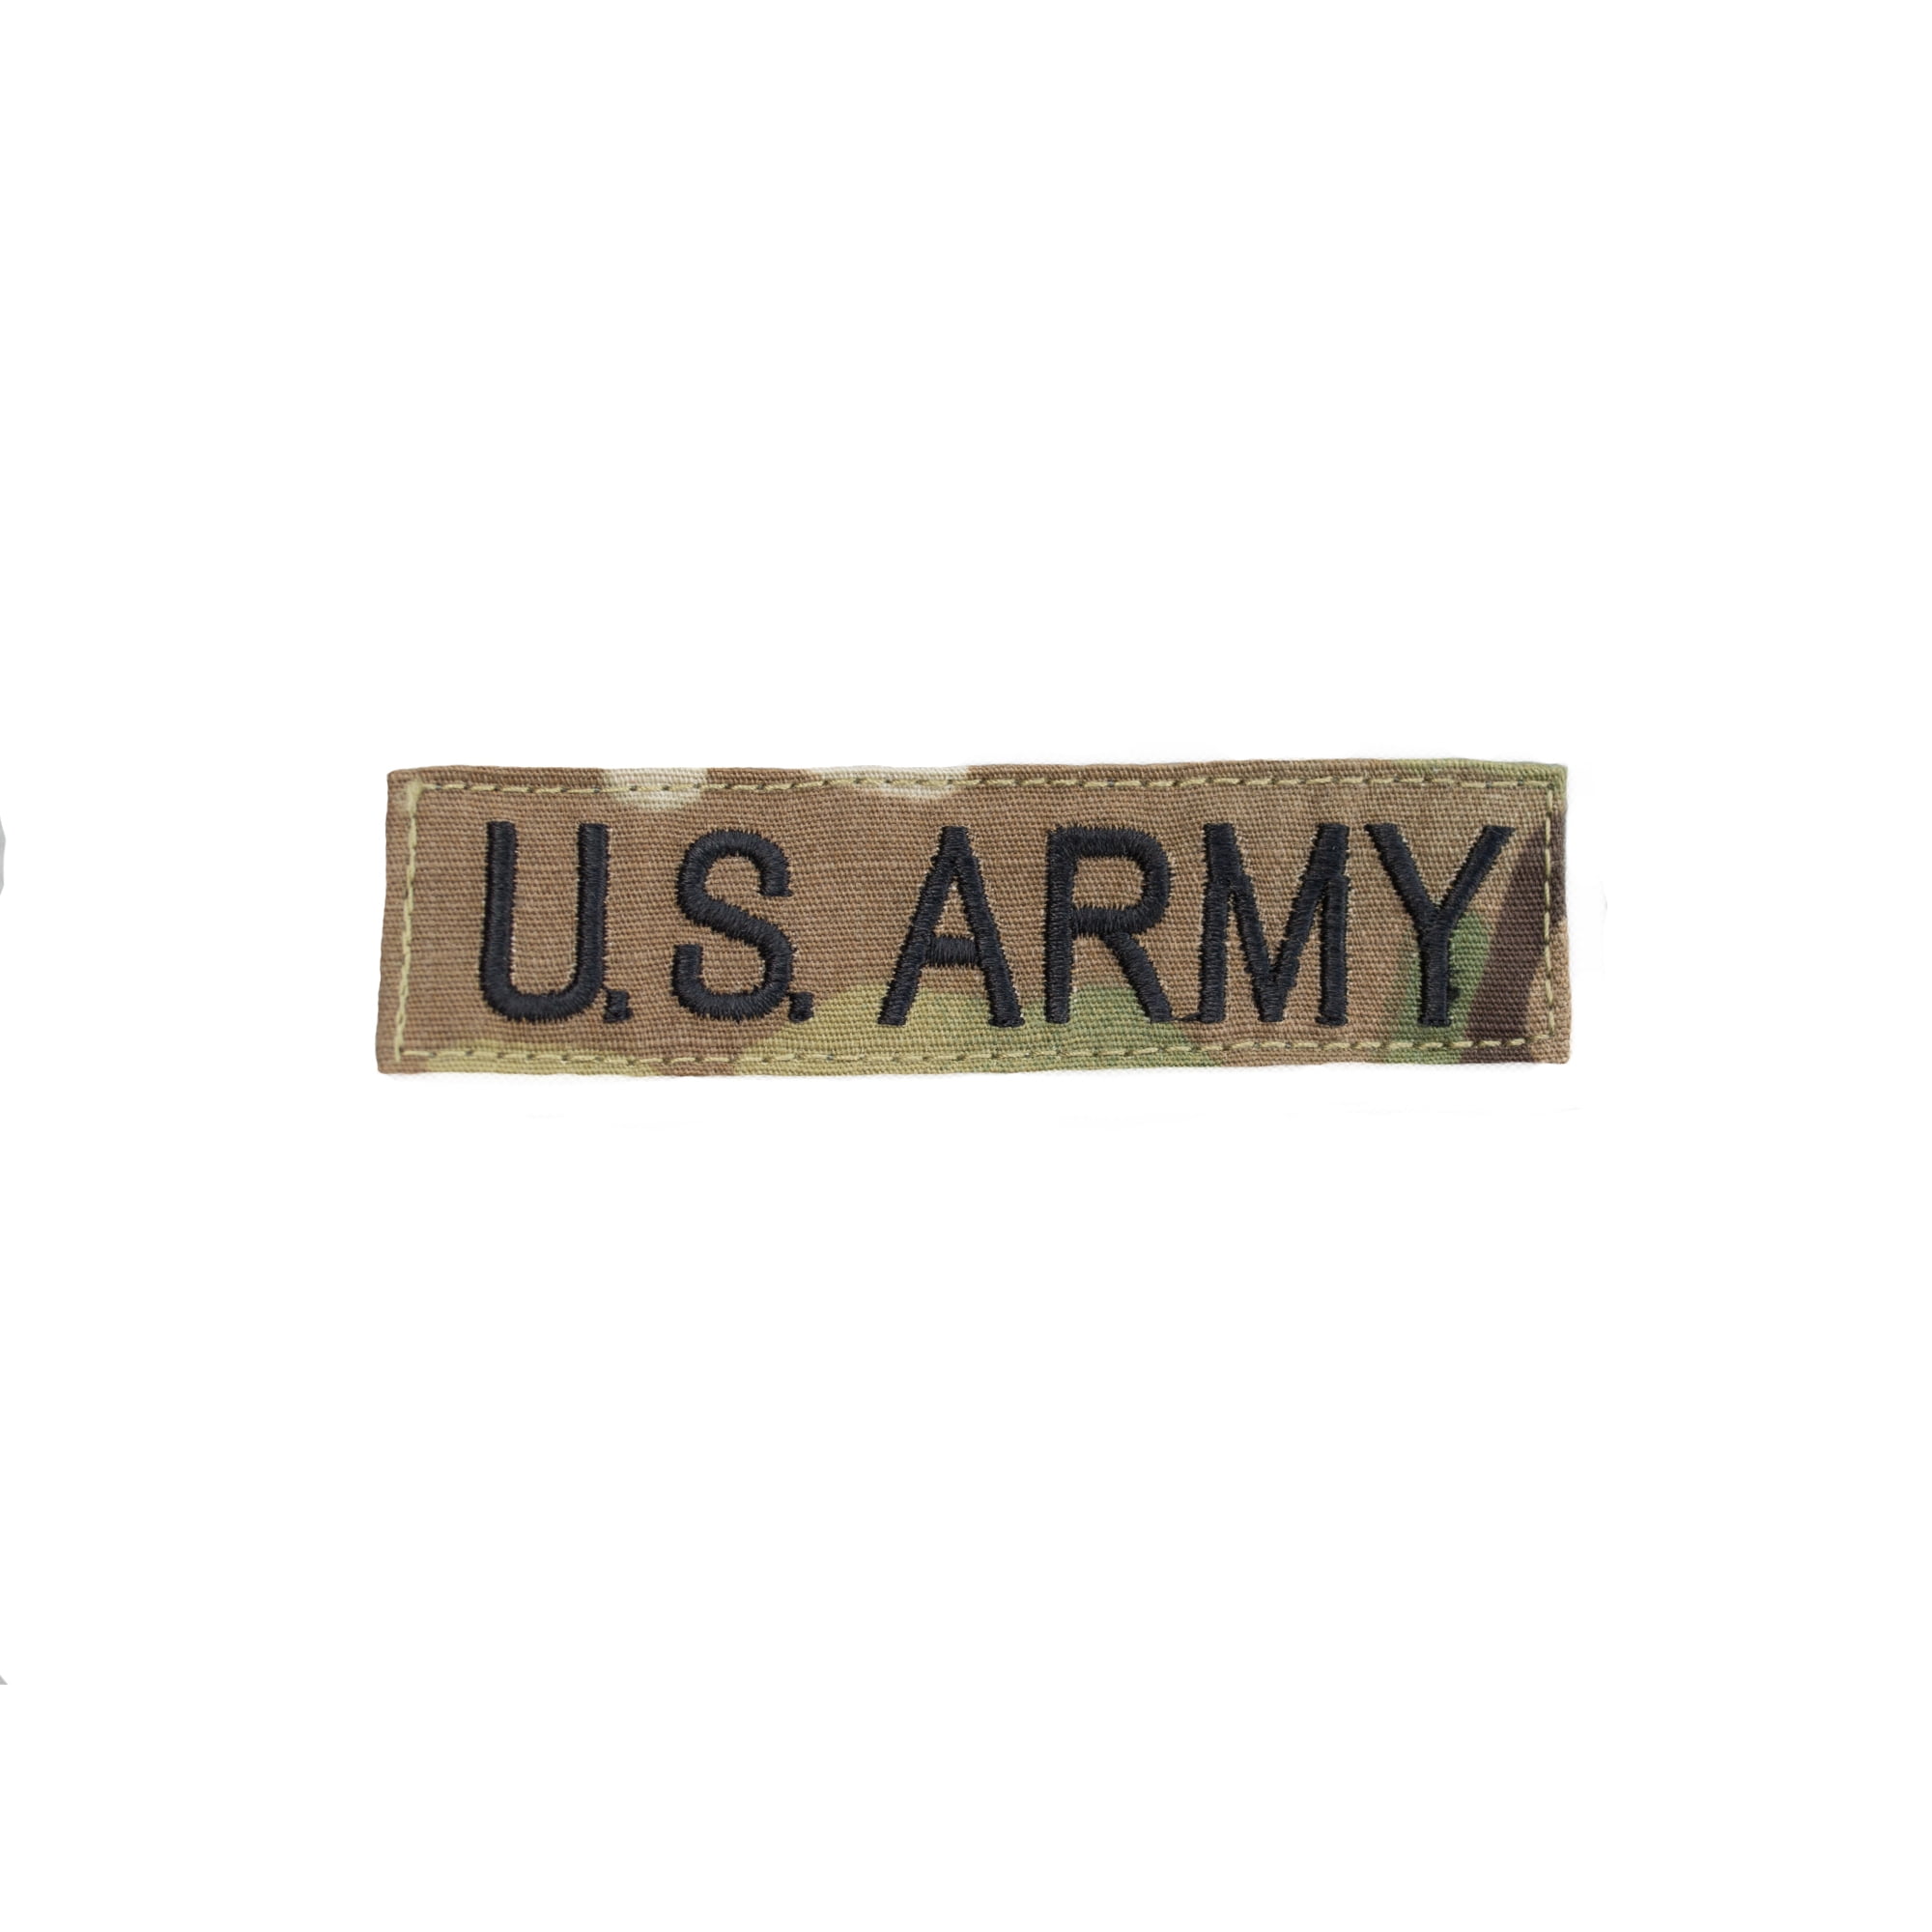 Army Name Tape: Individual Name - Embroidered on OCP Sew on